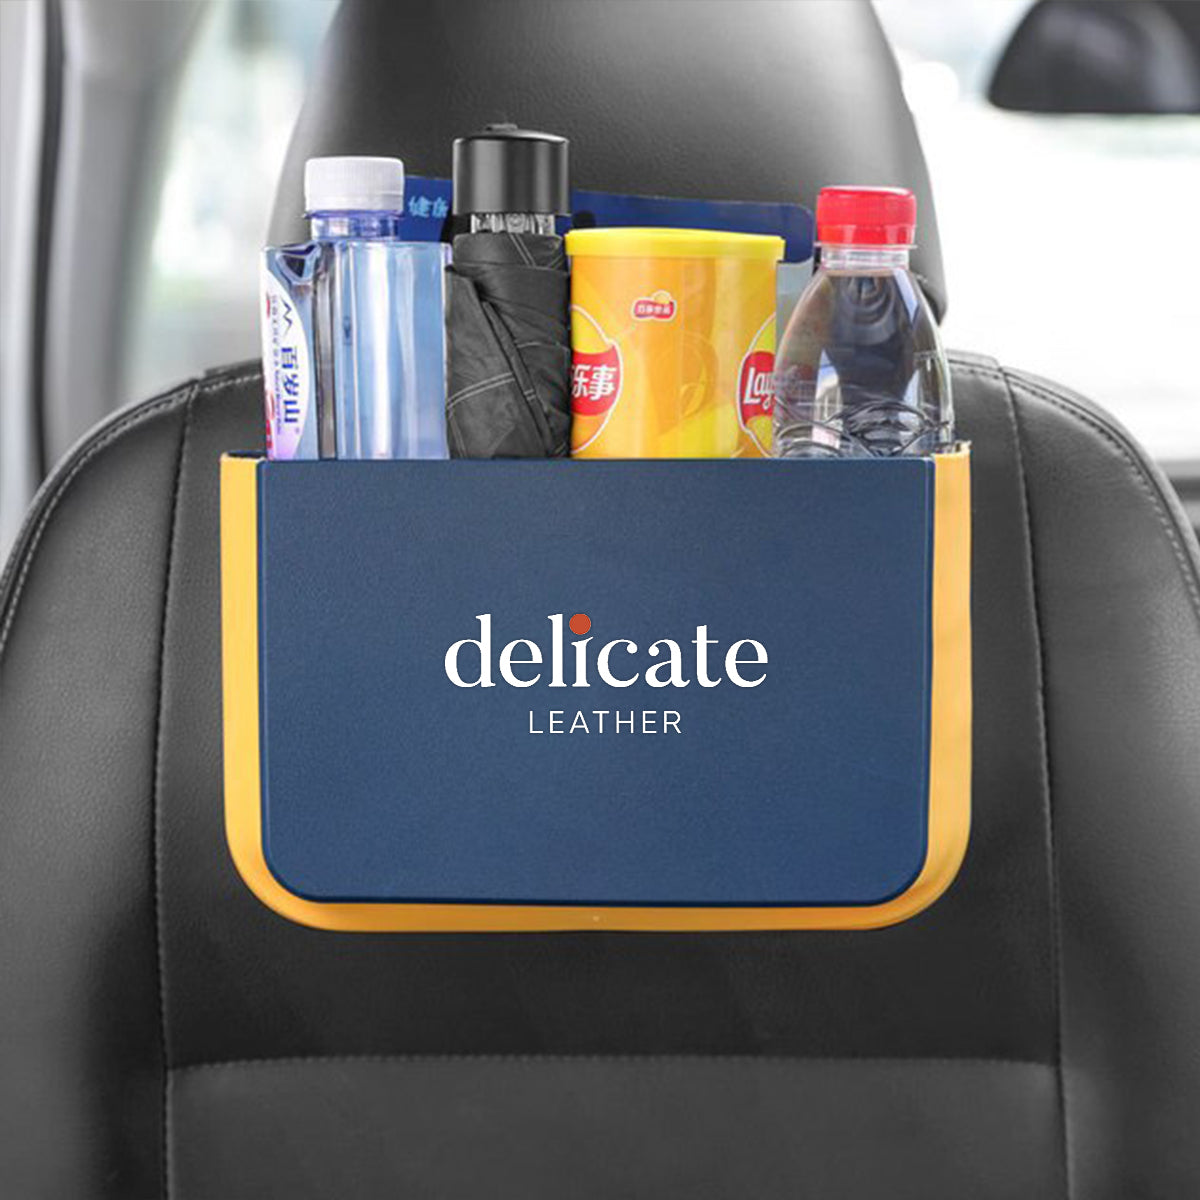 Hanging Waterproof Car Trash can-Foldable, Custom For Your Cars, Waterproof, and Equipped with Cup Holders and Trays. Multi-Purpose, Car Accessories MT11992 - Delicate Leather